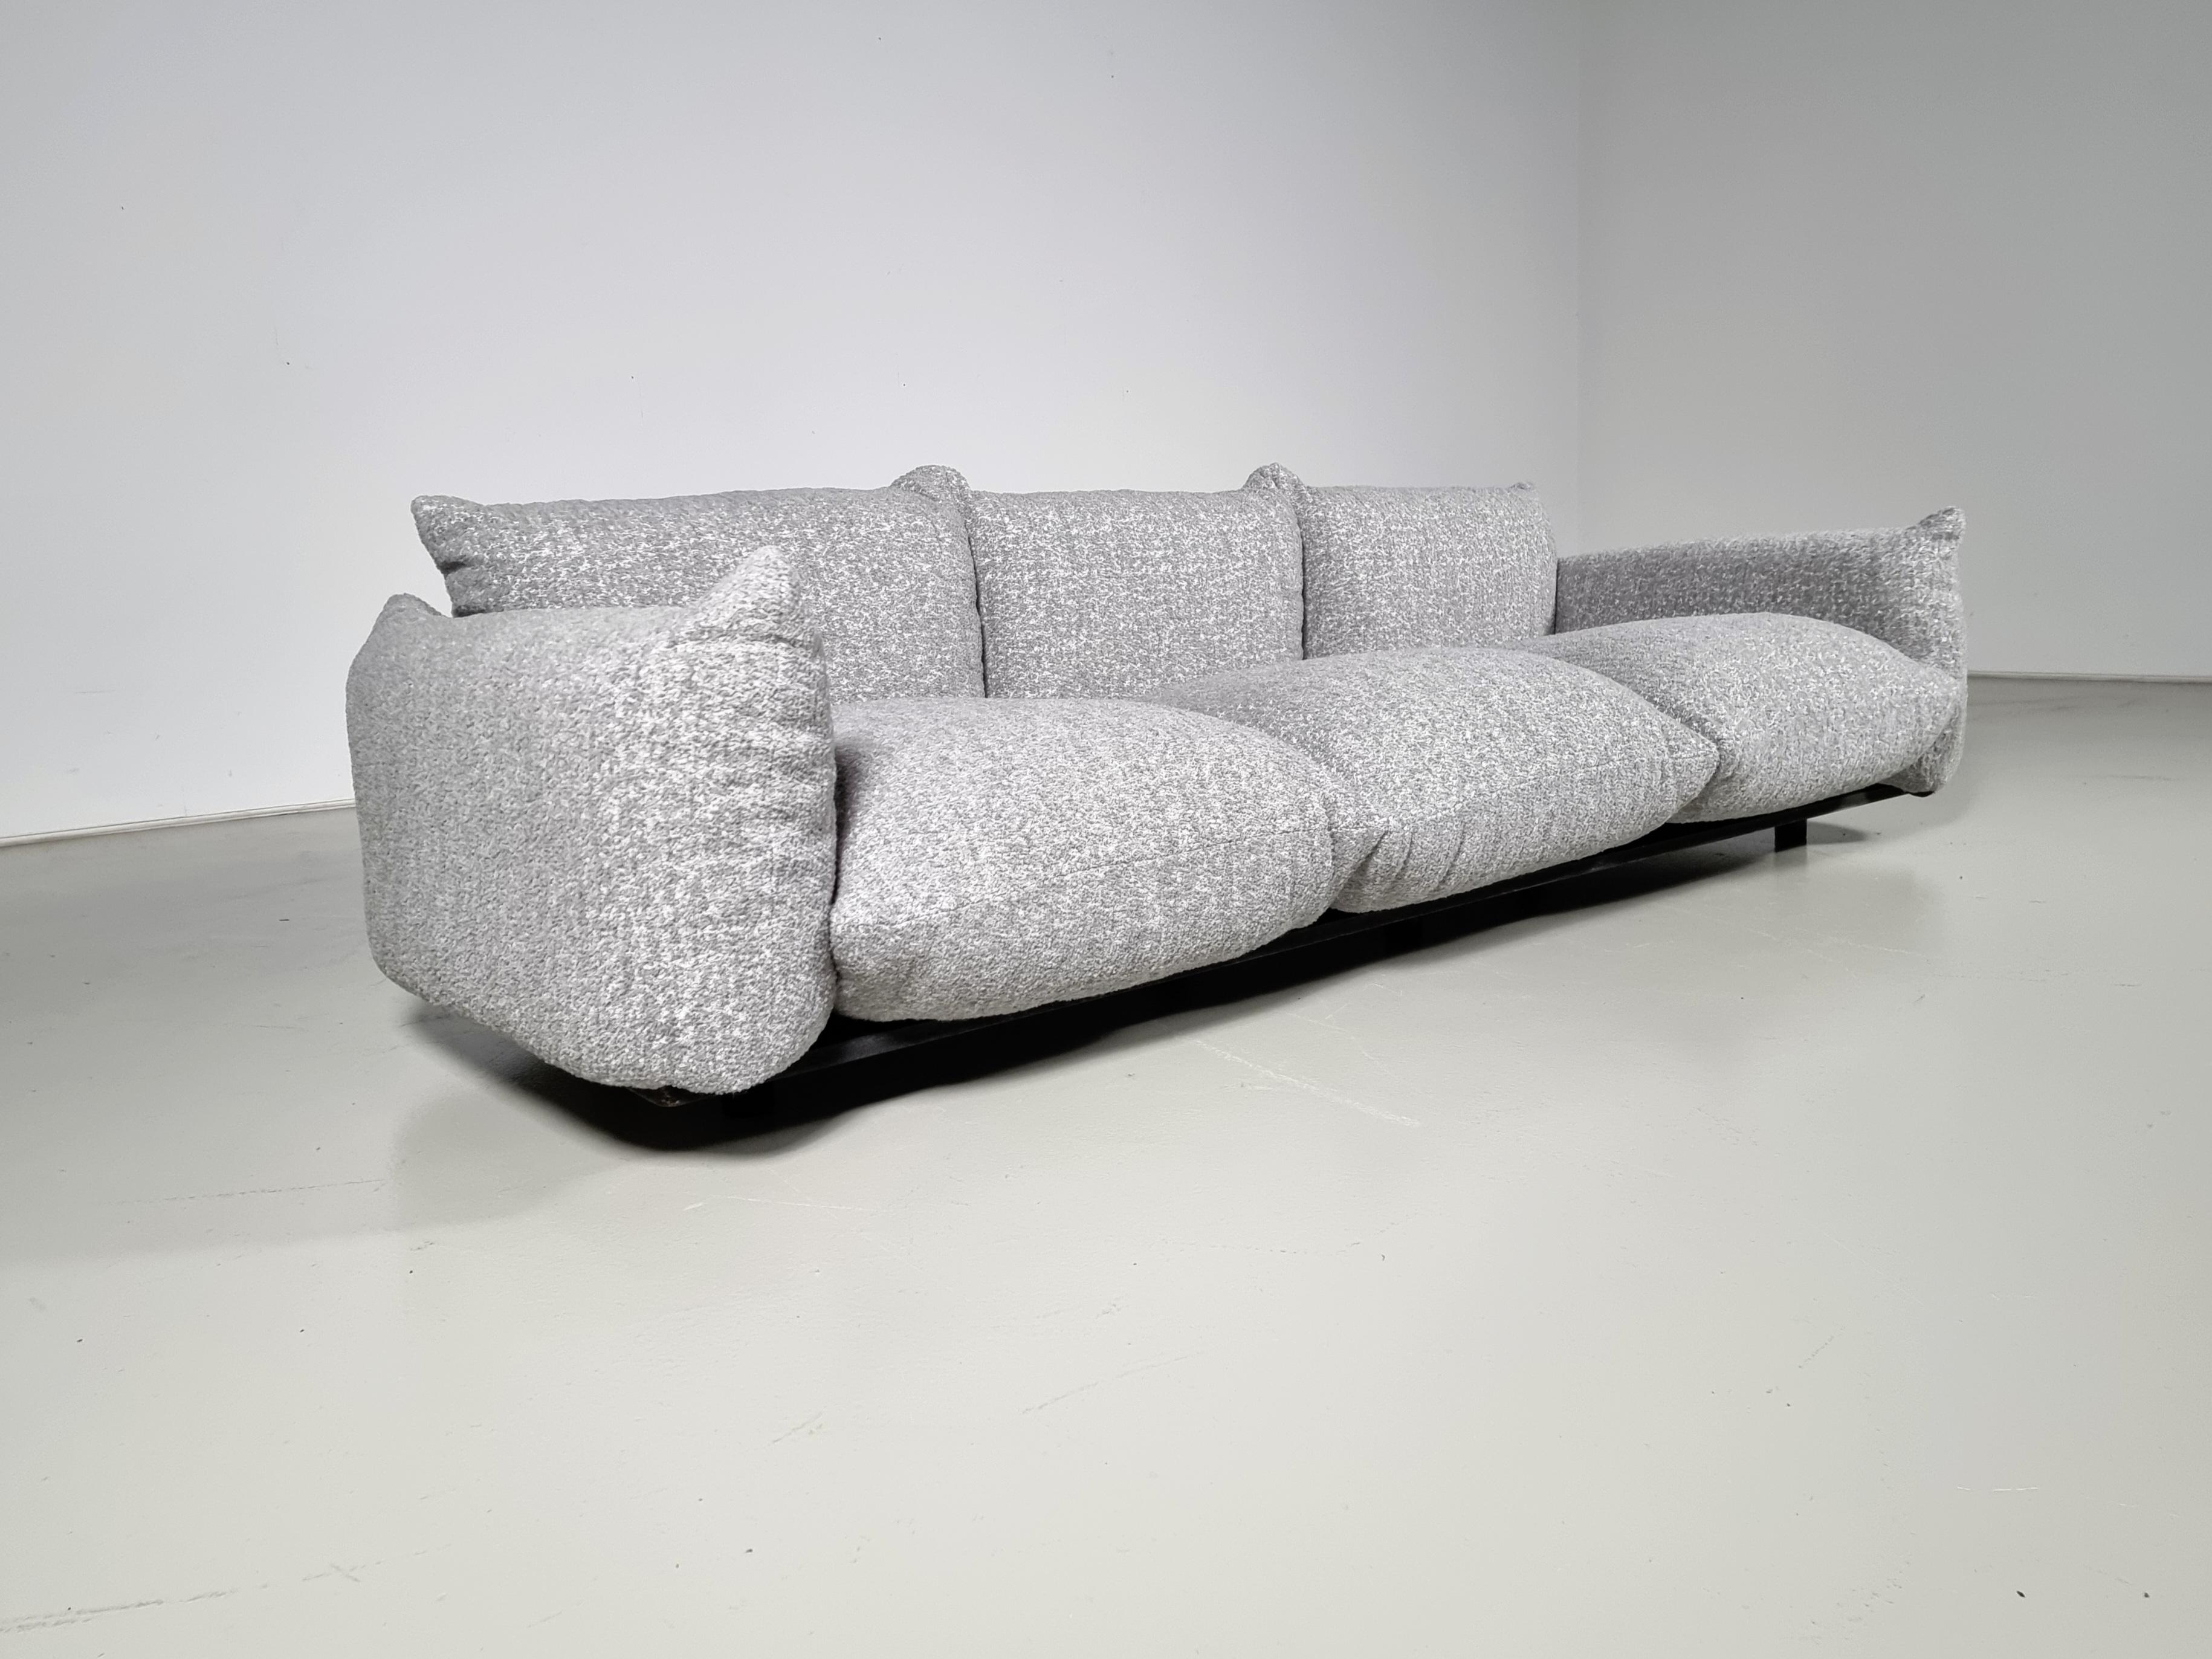 Mario Marenco for Arflex, 'Marenco' sofa, velvet, Italy, 1970

This first edition Marenco sofa is designed by Mario Marenco for Arflex. This sofa features a system with making the armrest and seats the base portion. There is a metal tubular frame